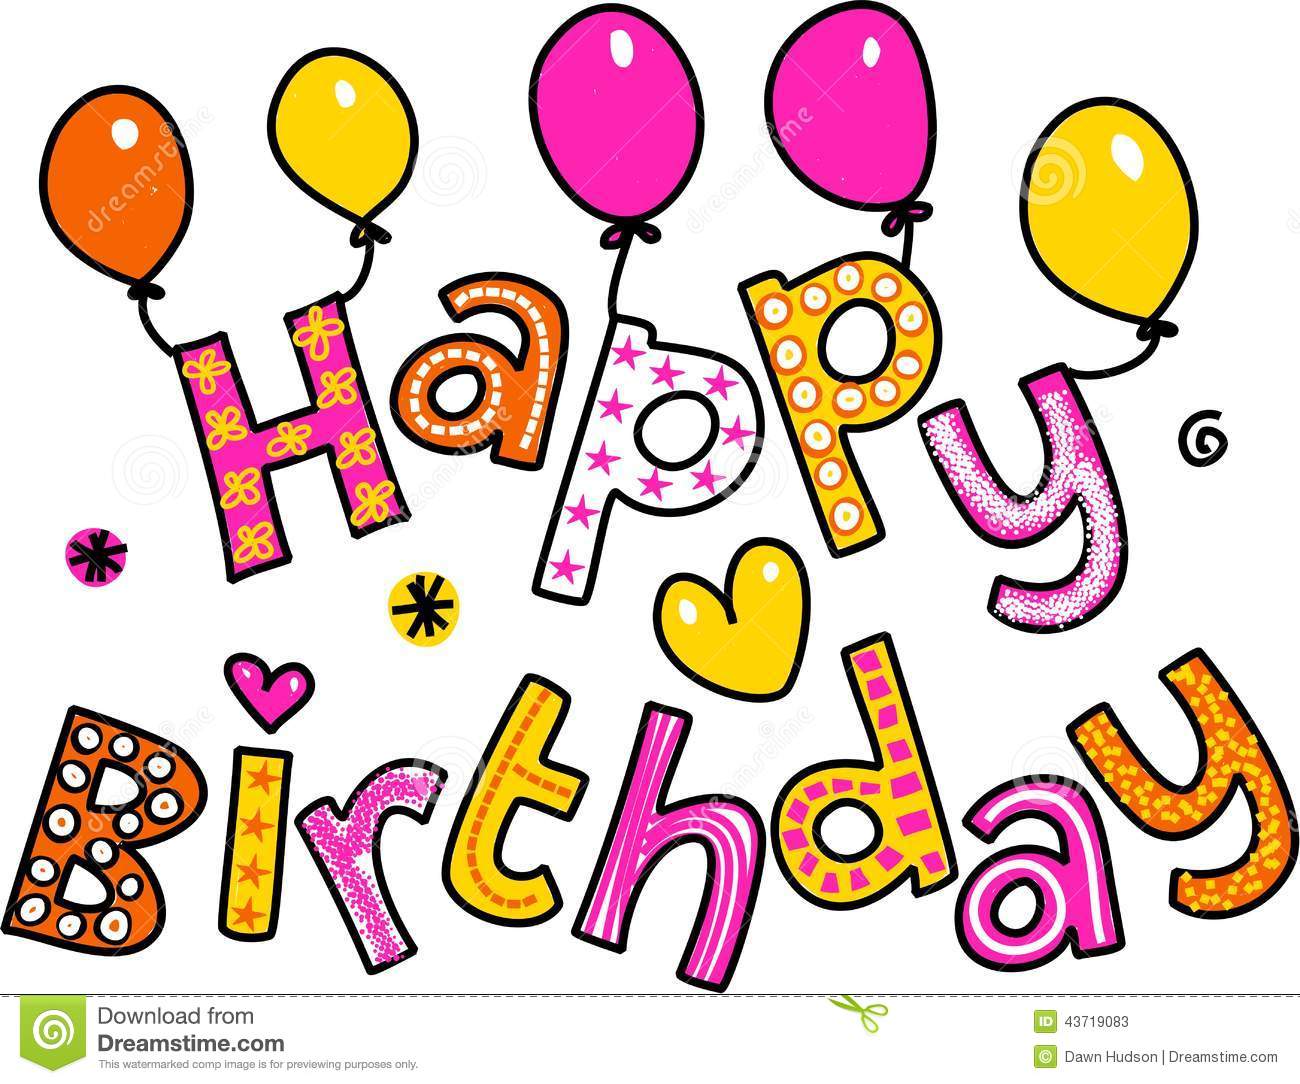 free download of animated birthday clip art - photo #24